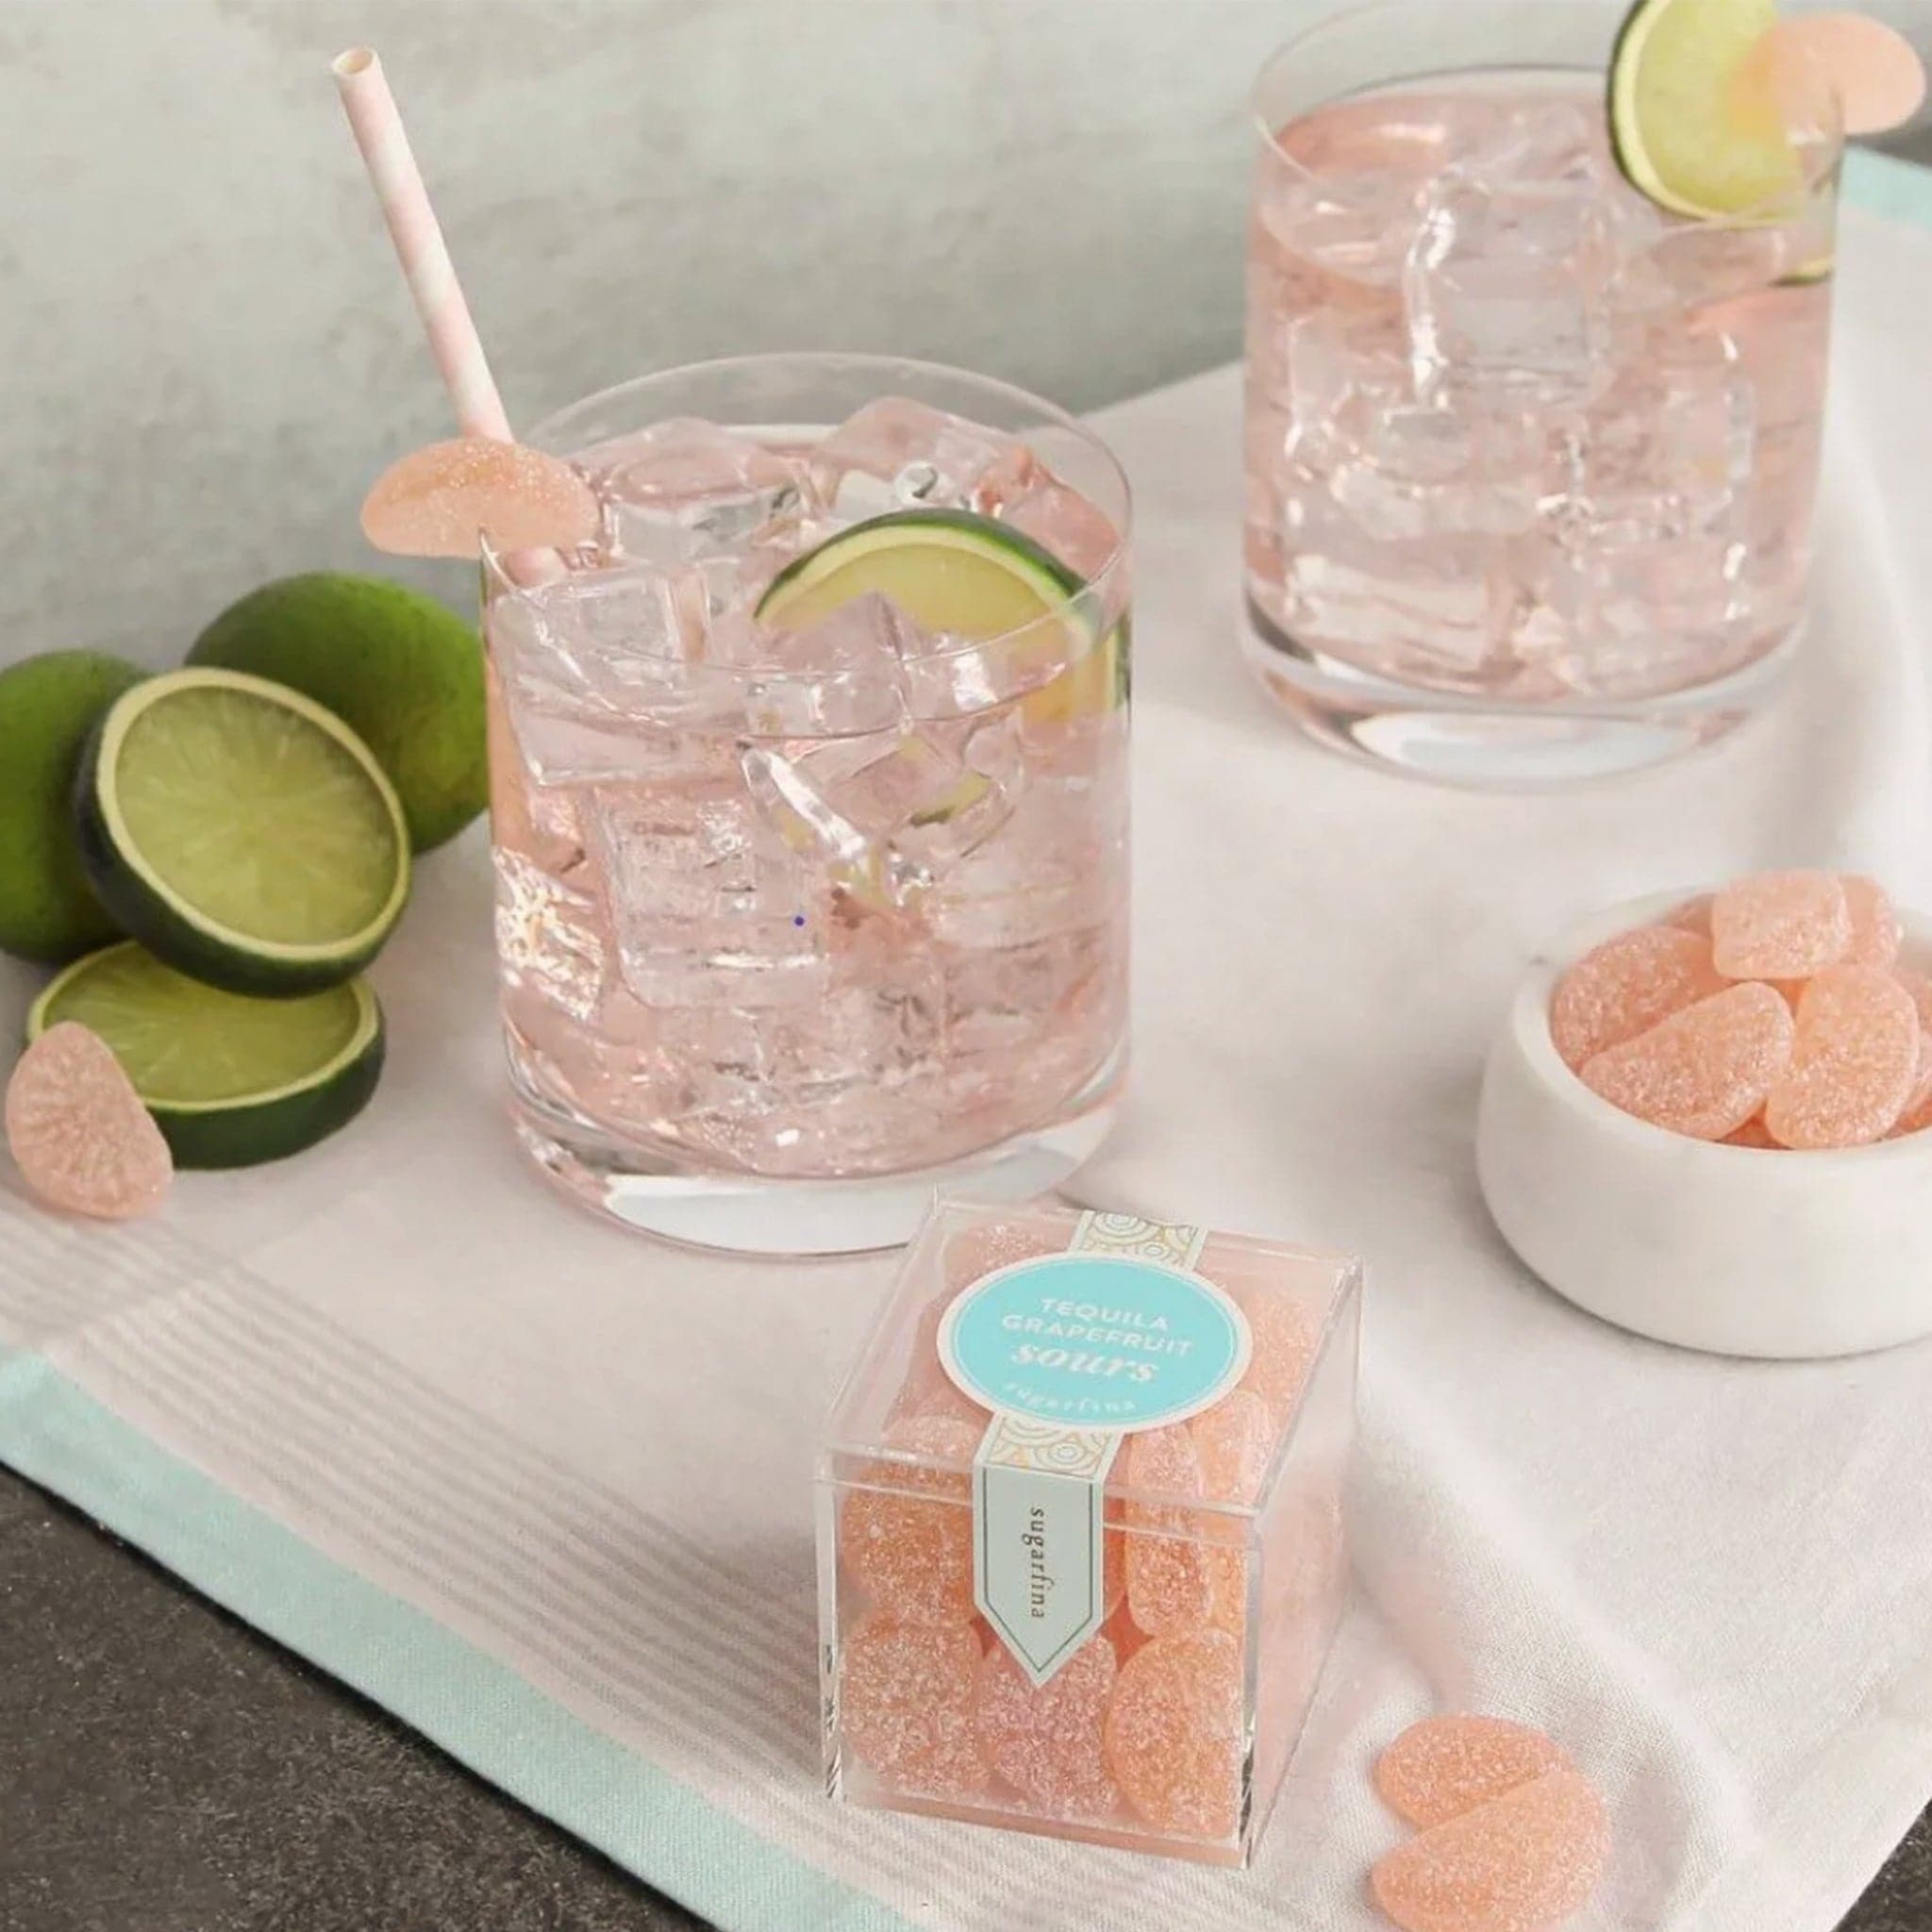 Plastic cube box of grapefruit gummies positioned on a soft pink cocktails garnished with gummies and limes. A small bowl filled with gummies is positioned next to the pair of glasses. 